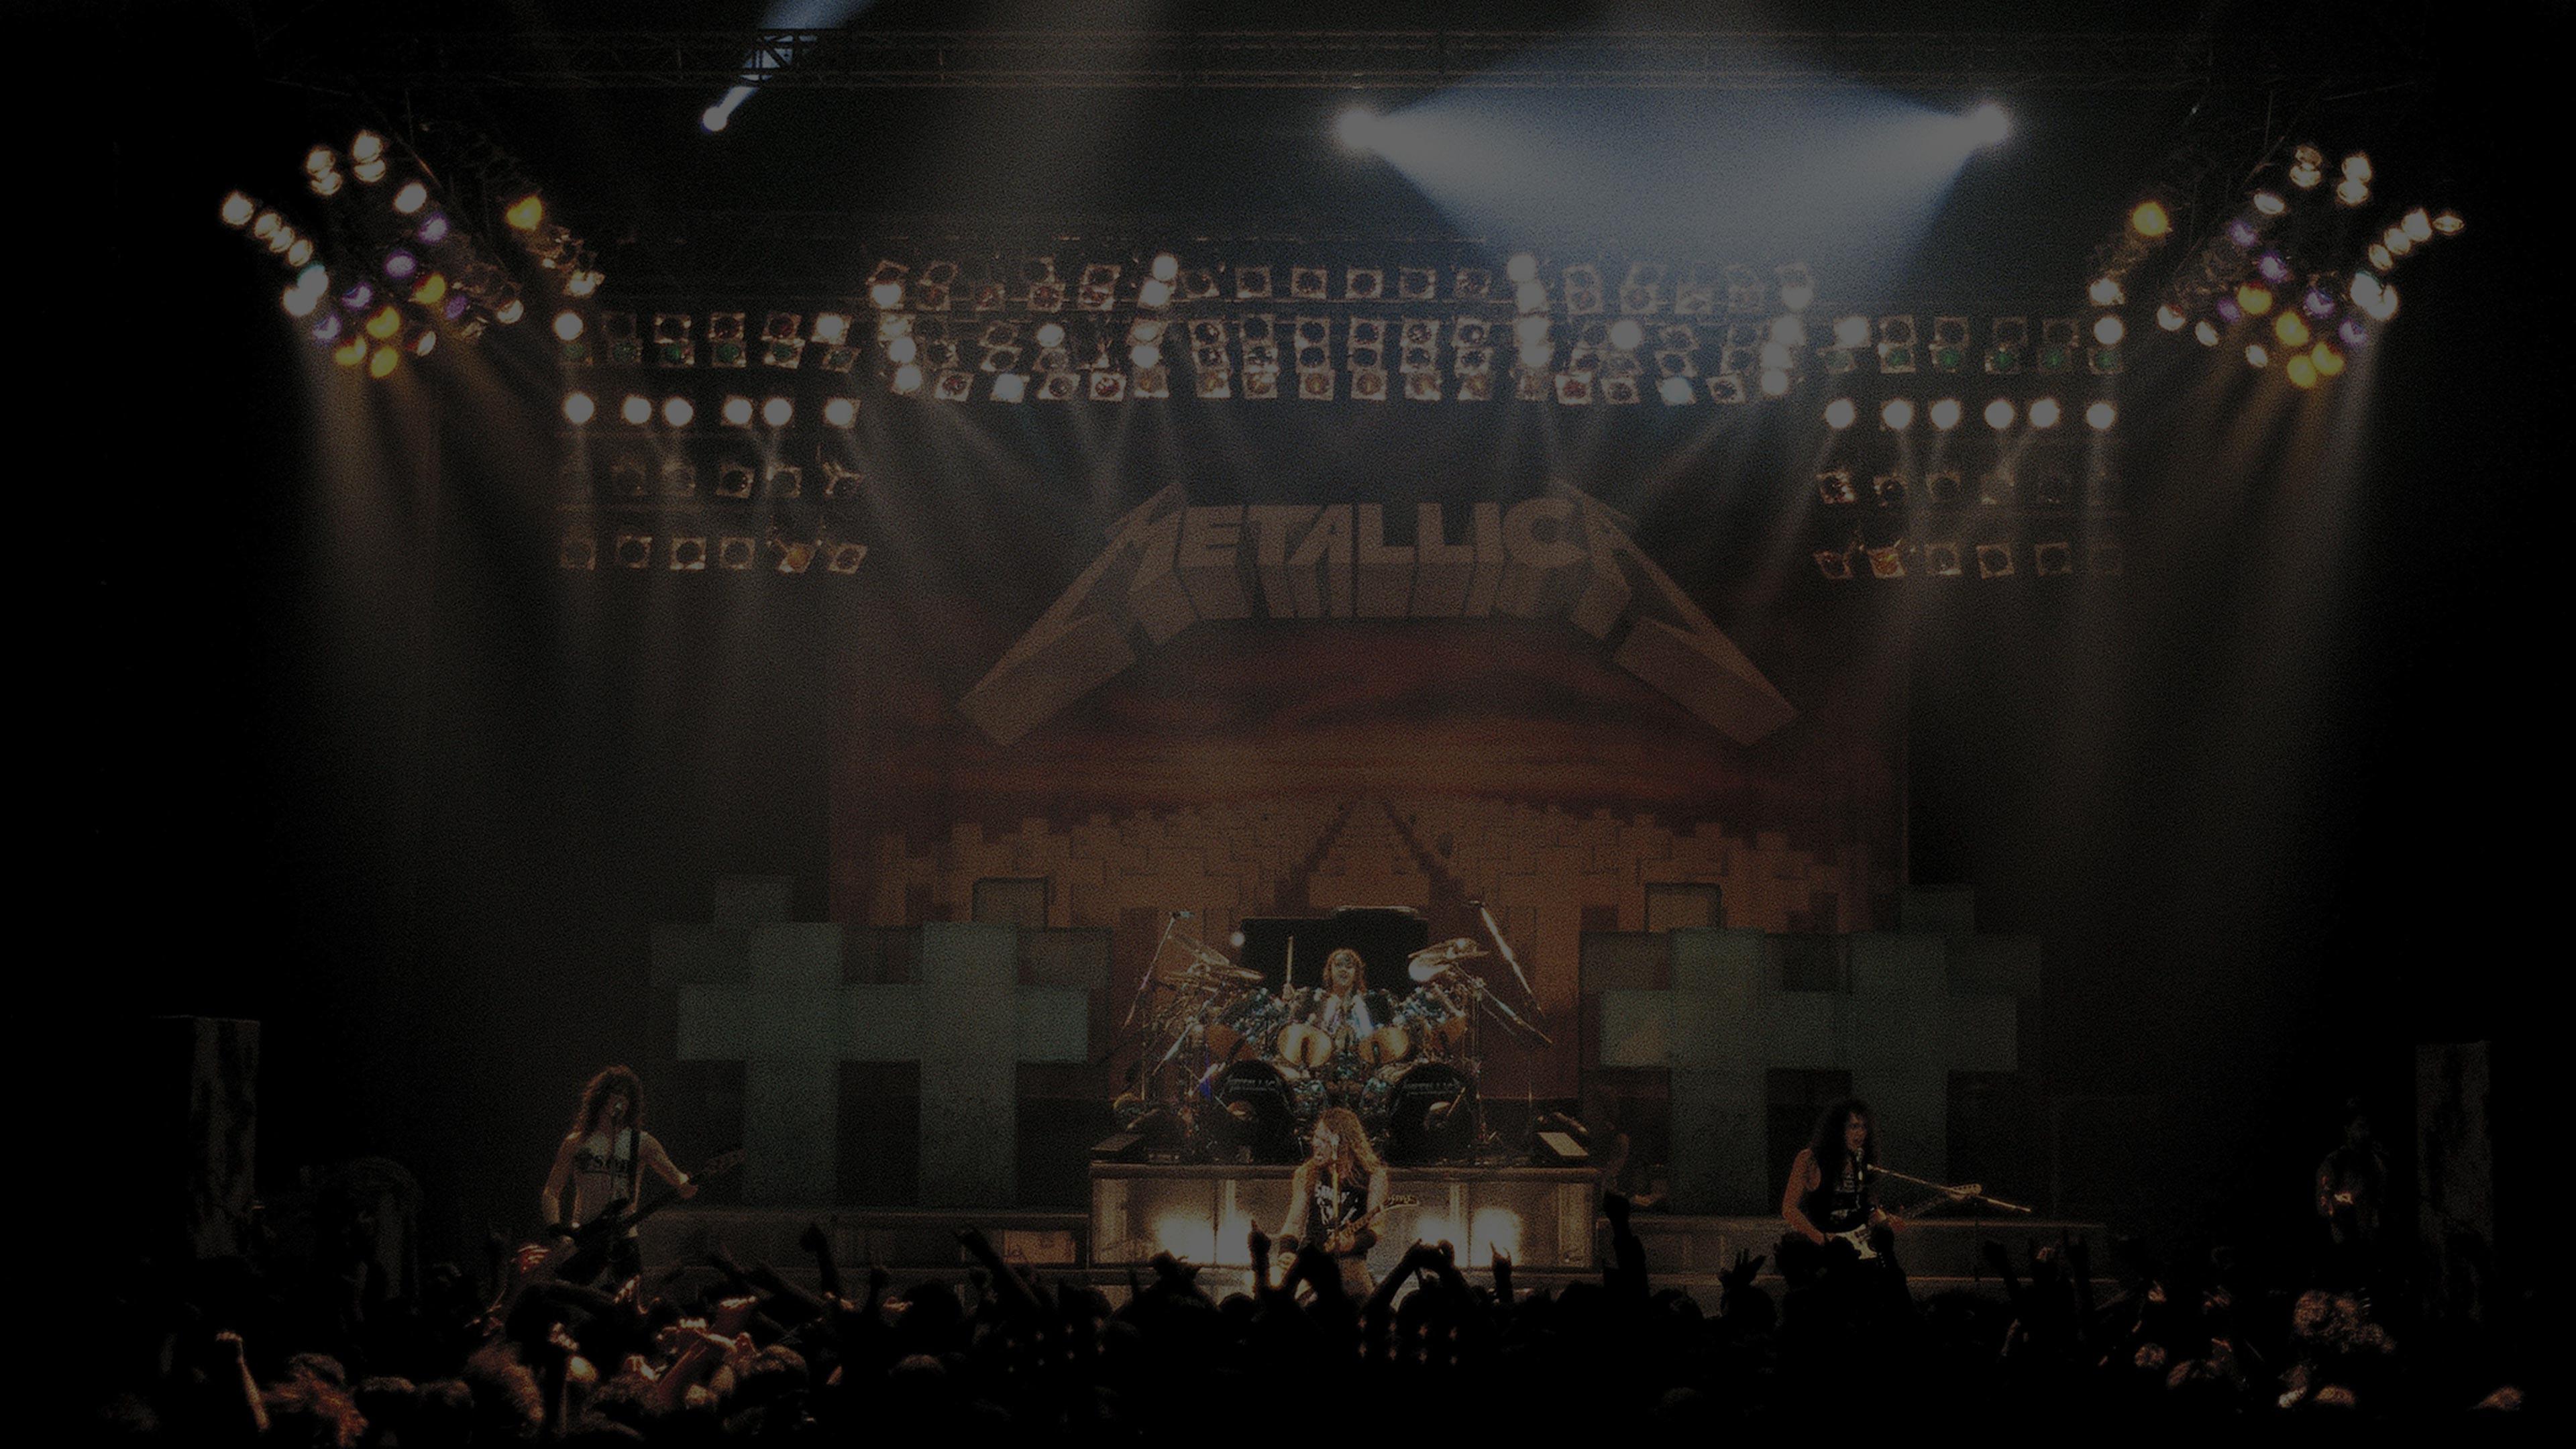 Metallica at Max Bell Centre in Calgary, AB, Canada on December 17, 1986